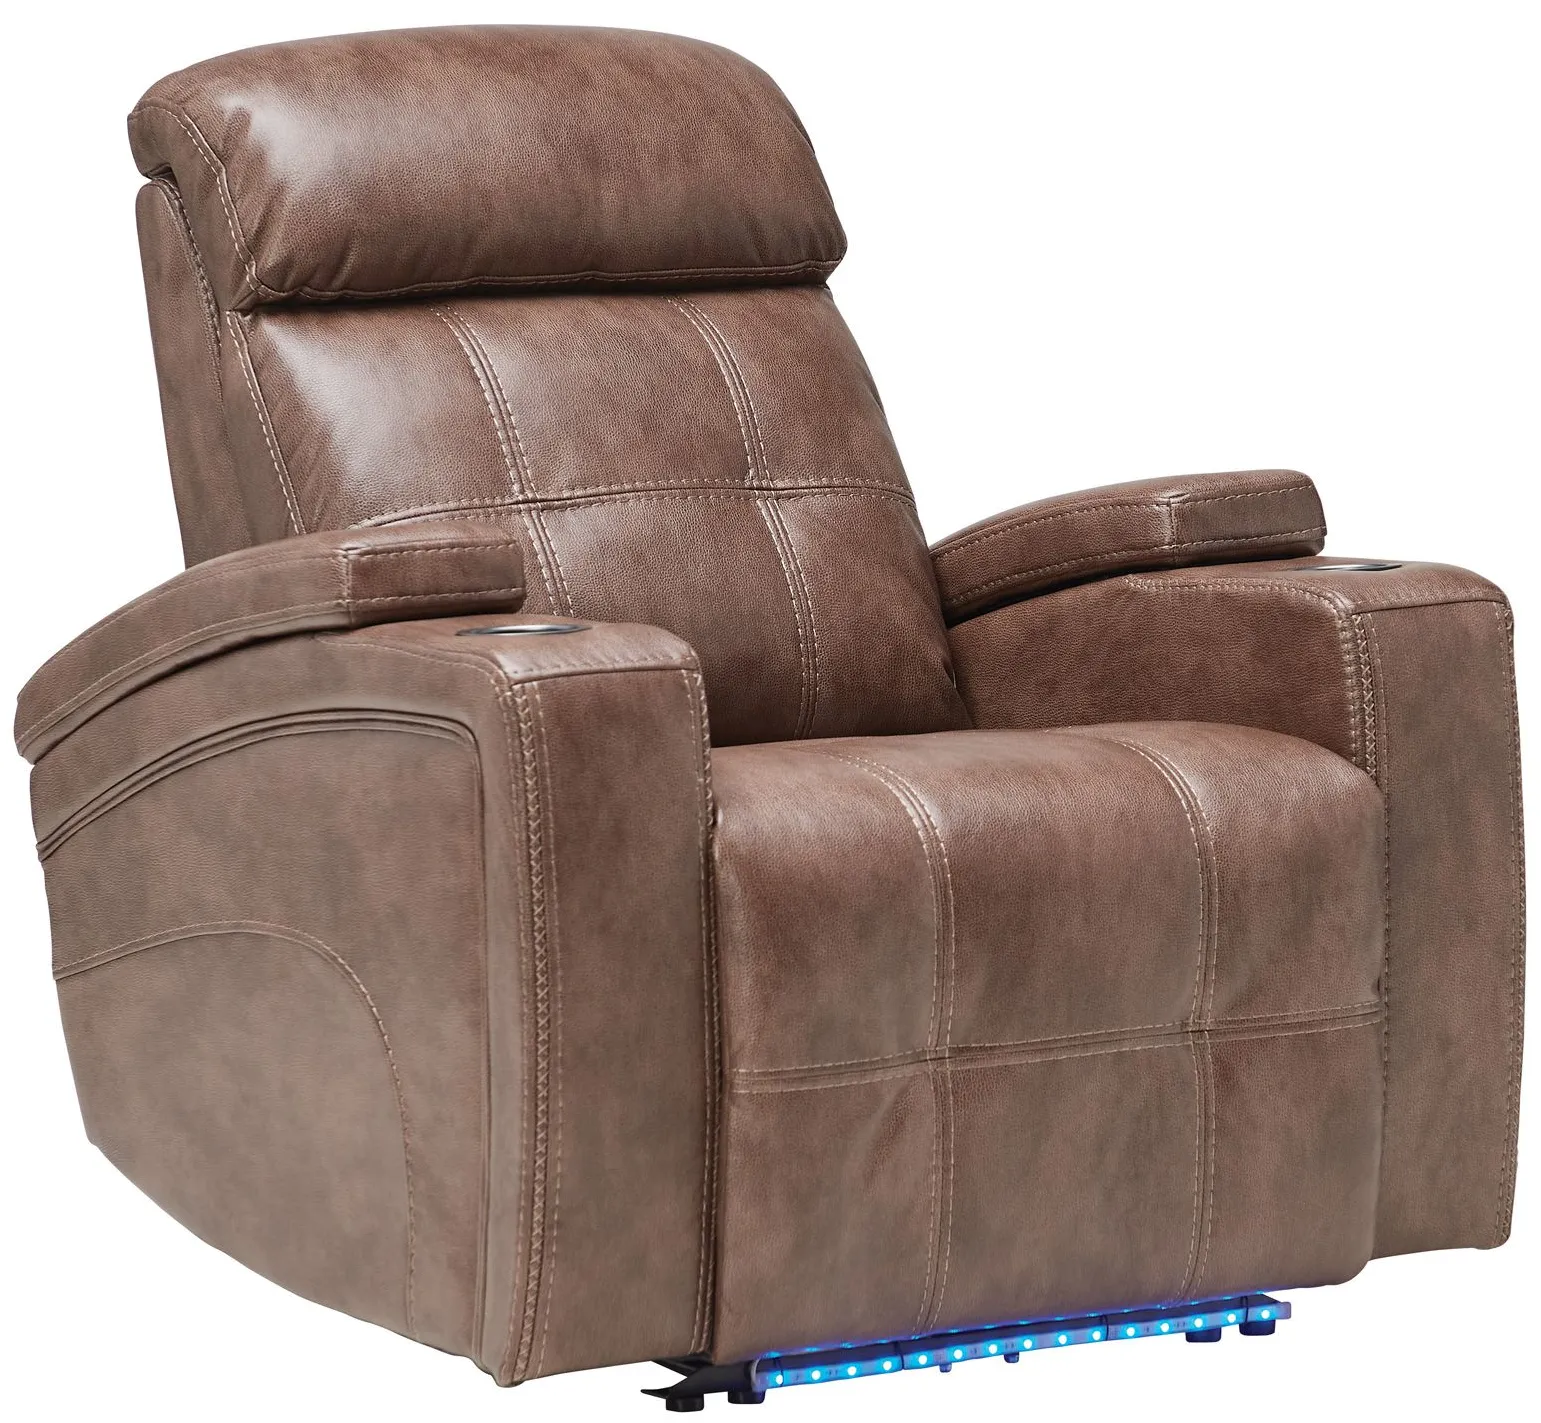 Astro Brown Dual Power Recliner